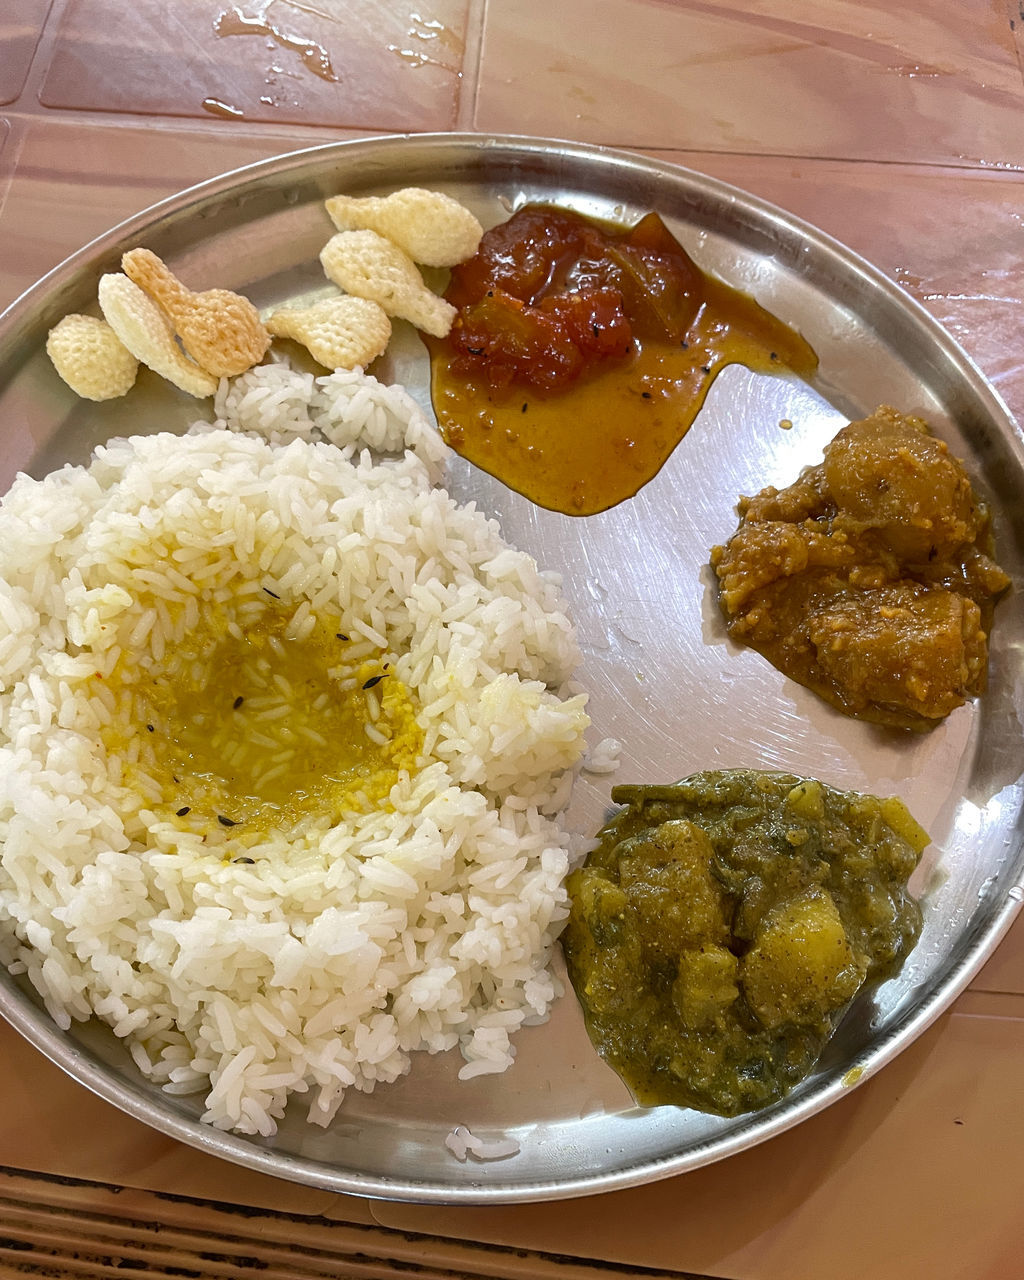 food and drink, food, curry, healthy eating, dish, rice and curry, wellbeing, freshness, cuisine, rice - food staple, vegetable, steamed rice, meal, indoors, produce, high angle view, no people, table, stew, asian food, indian food, indian cuisine, bowl, meat, still life